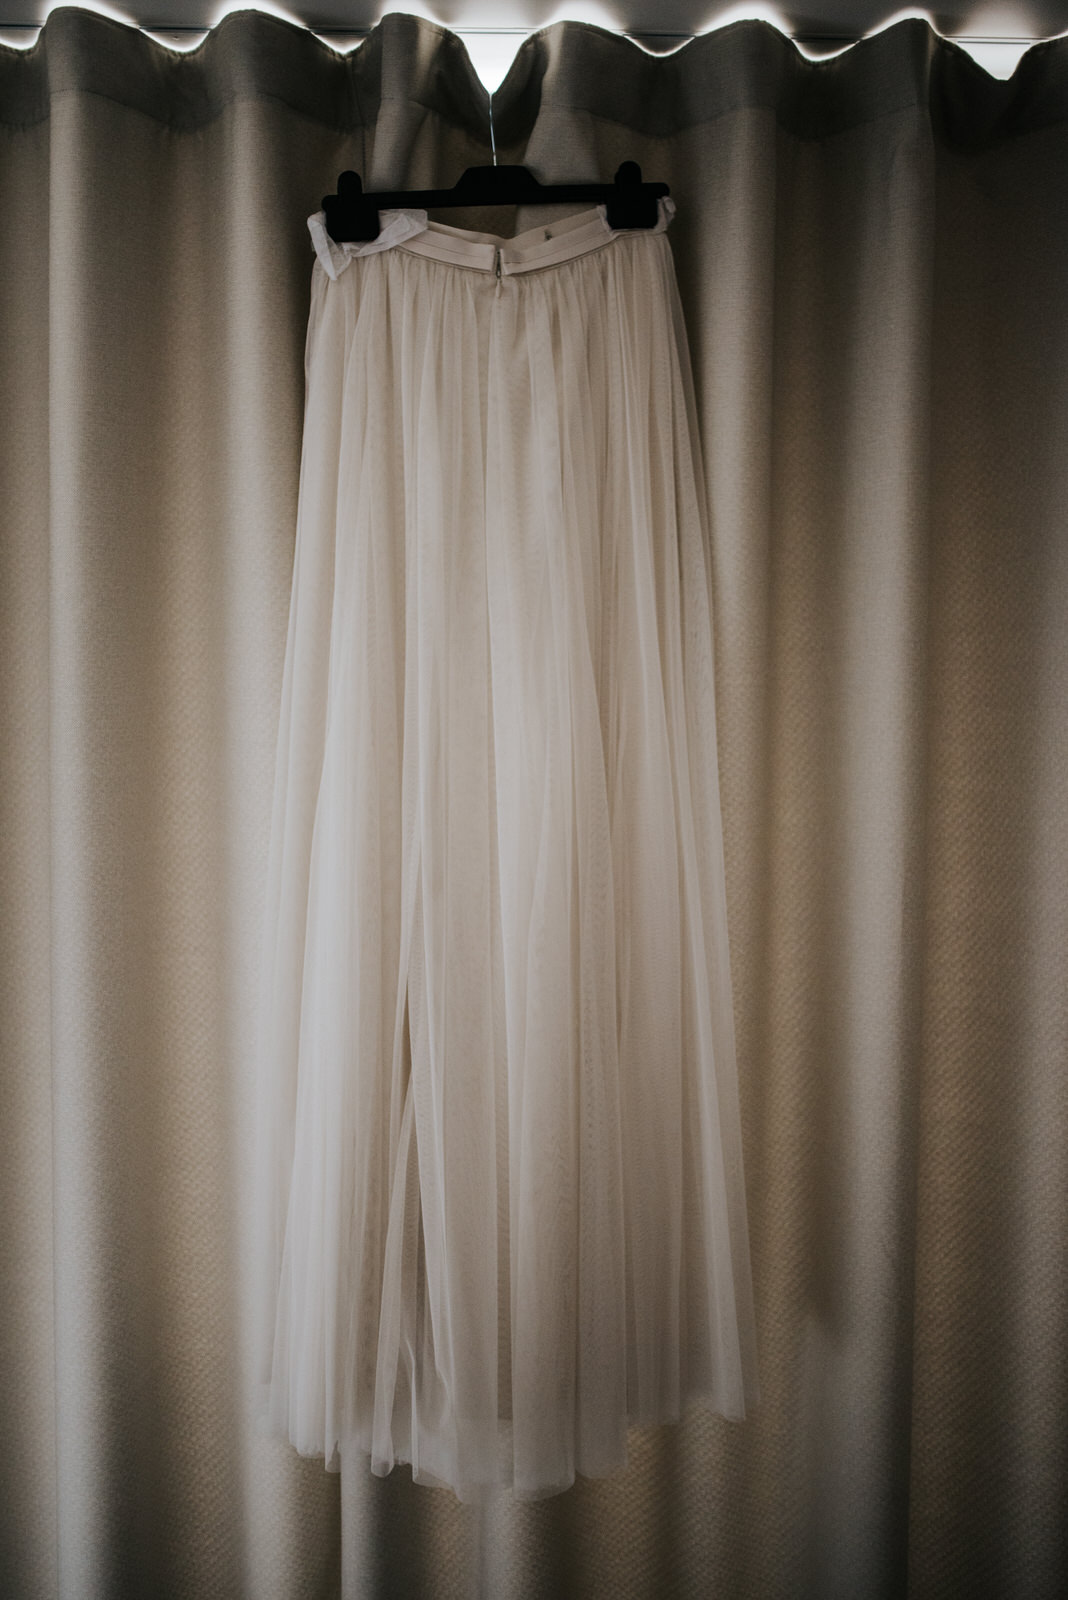 Bride's wedding skirt hanging by the window